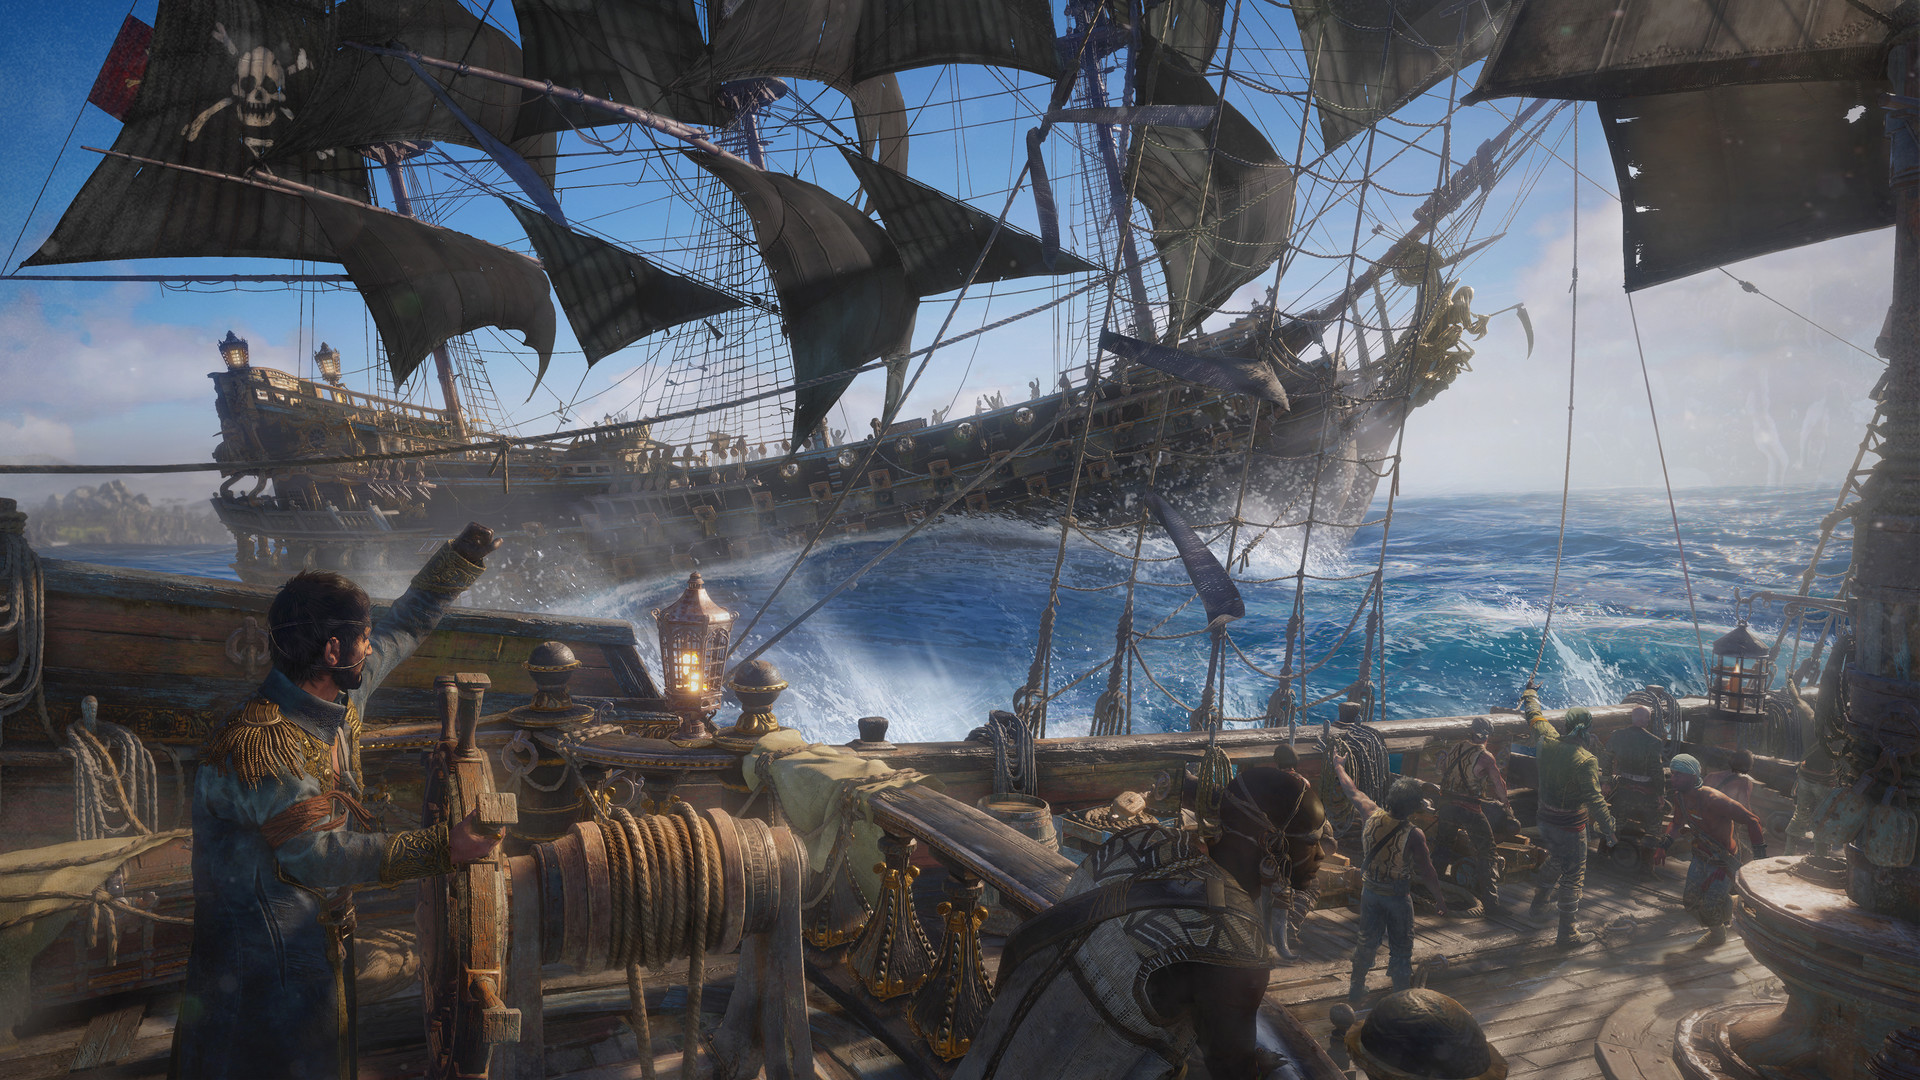 Skull and Bones system requirements for PC